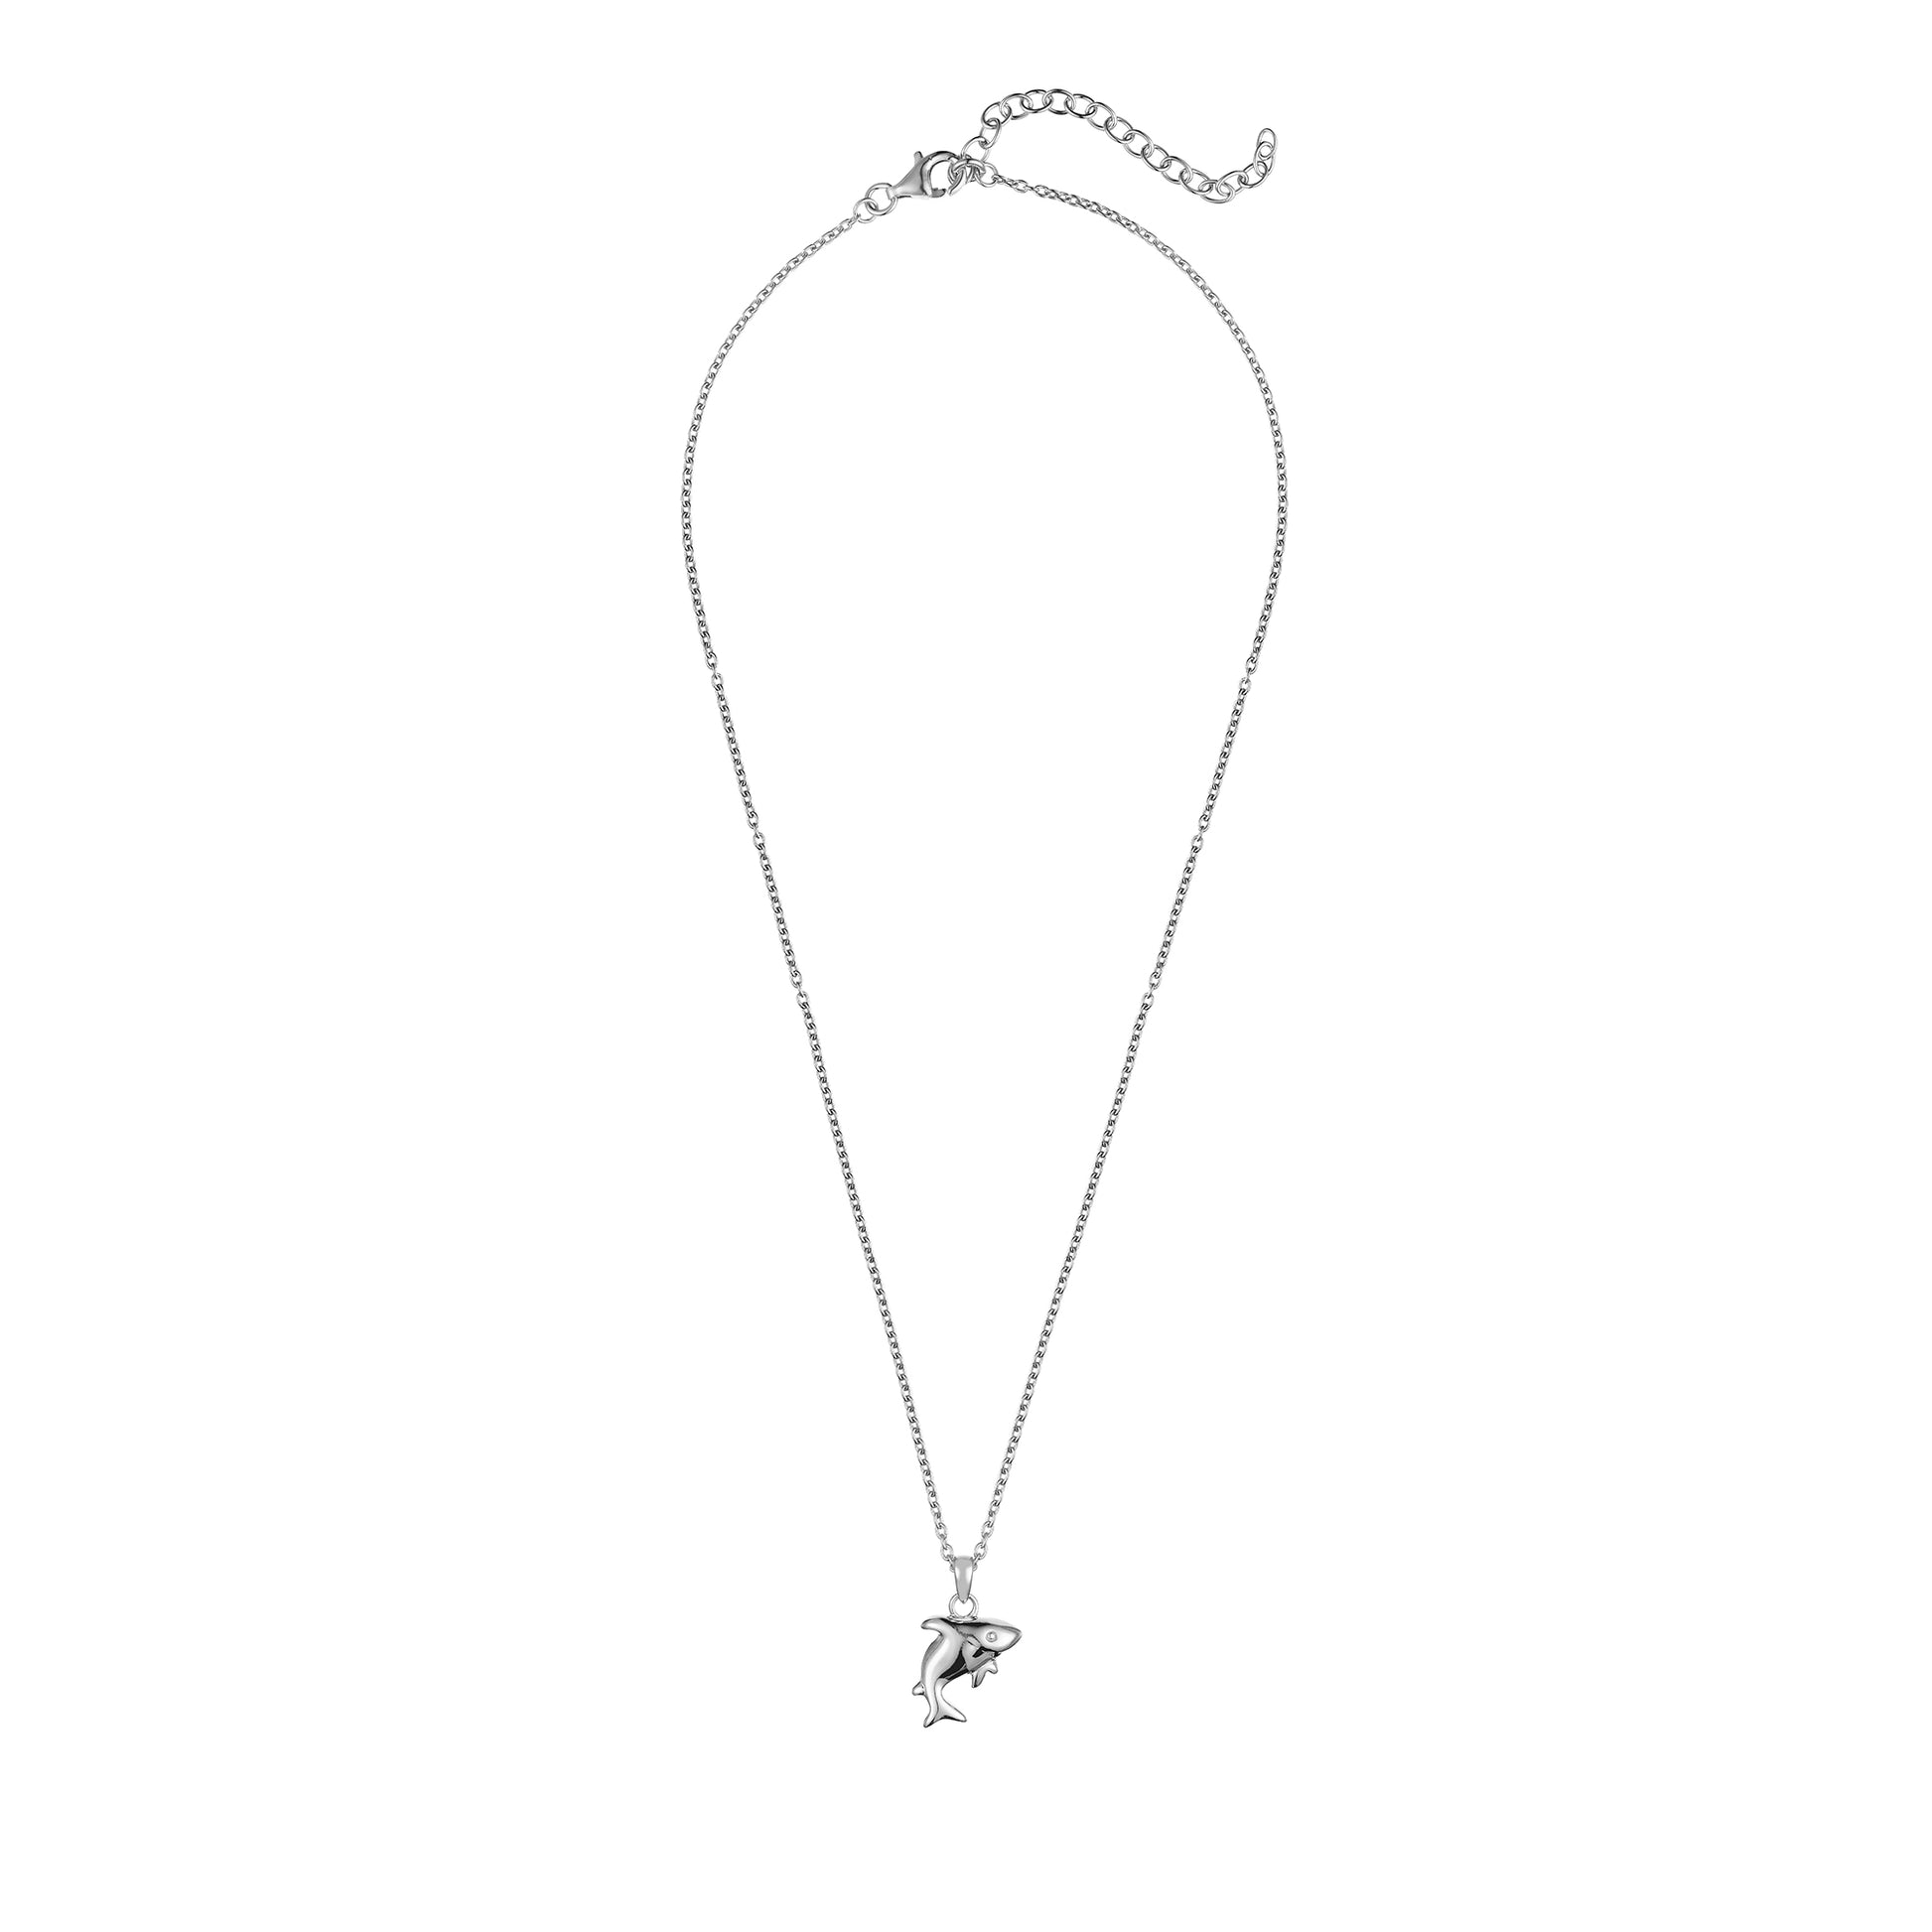 Children's Silver Shark with Smile Pendant on an Extendable Chain Necklace